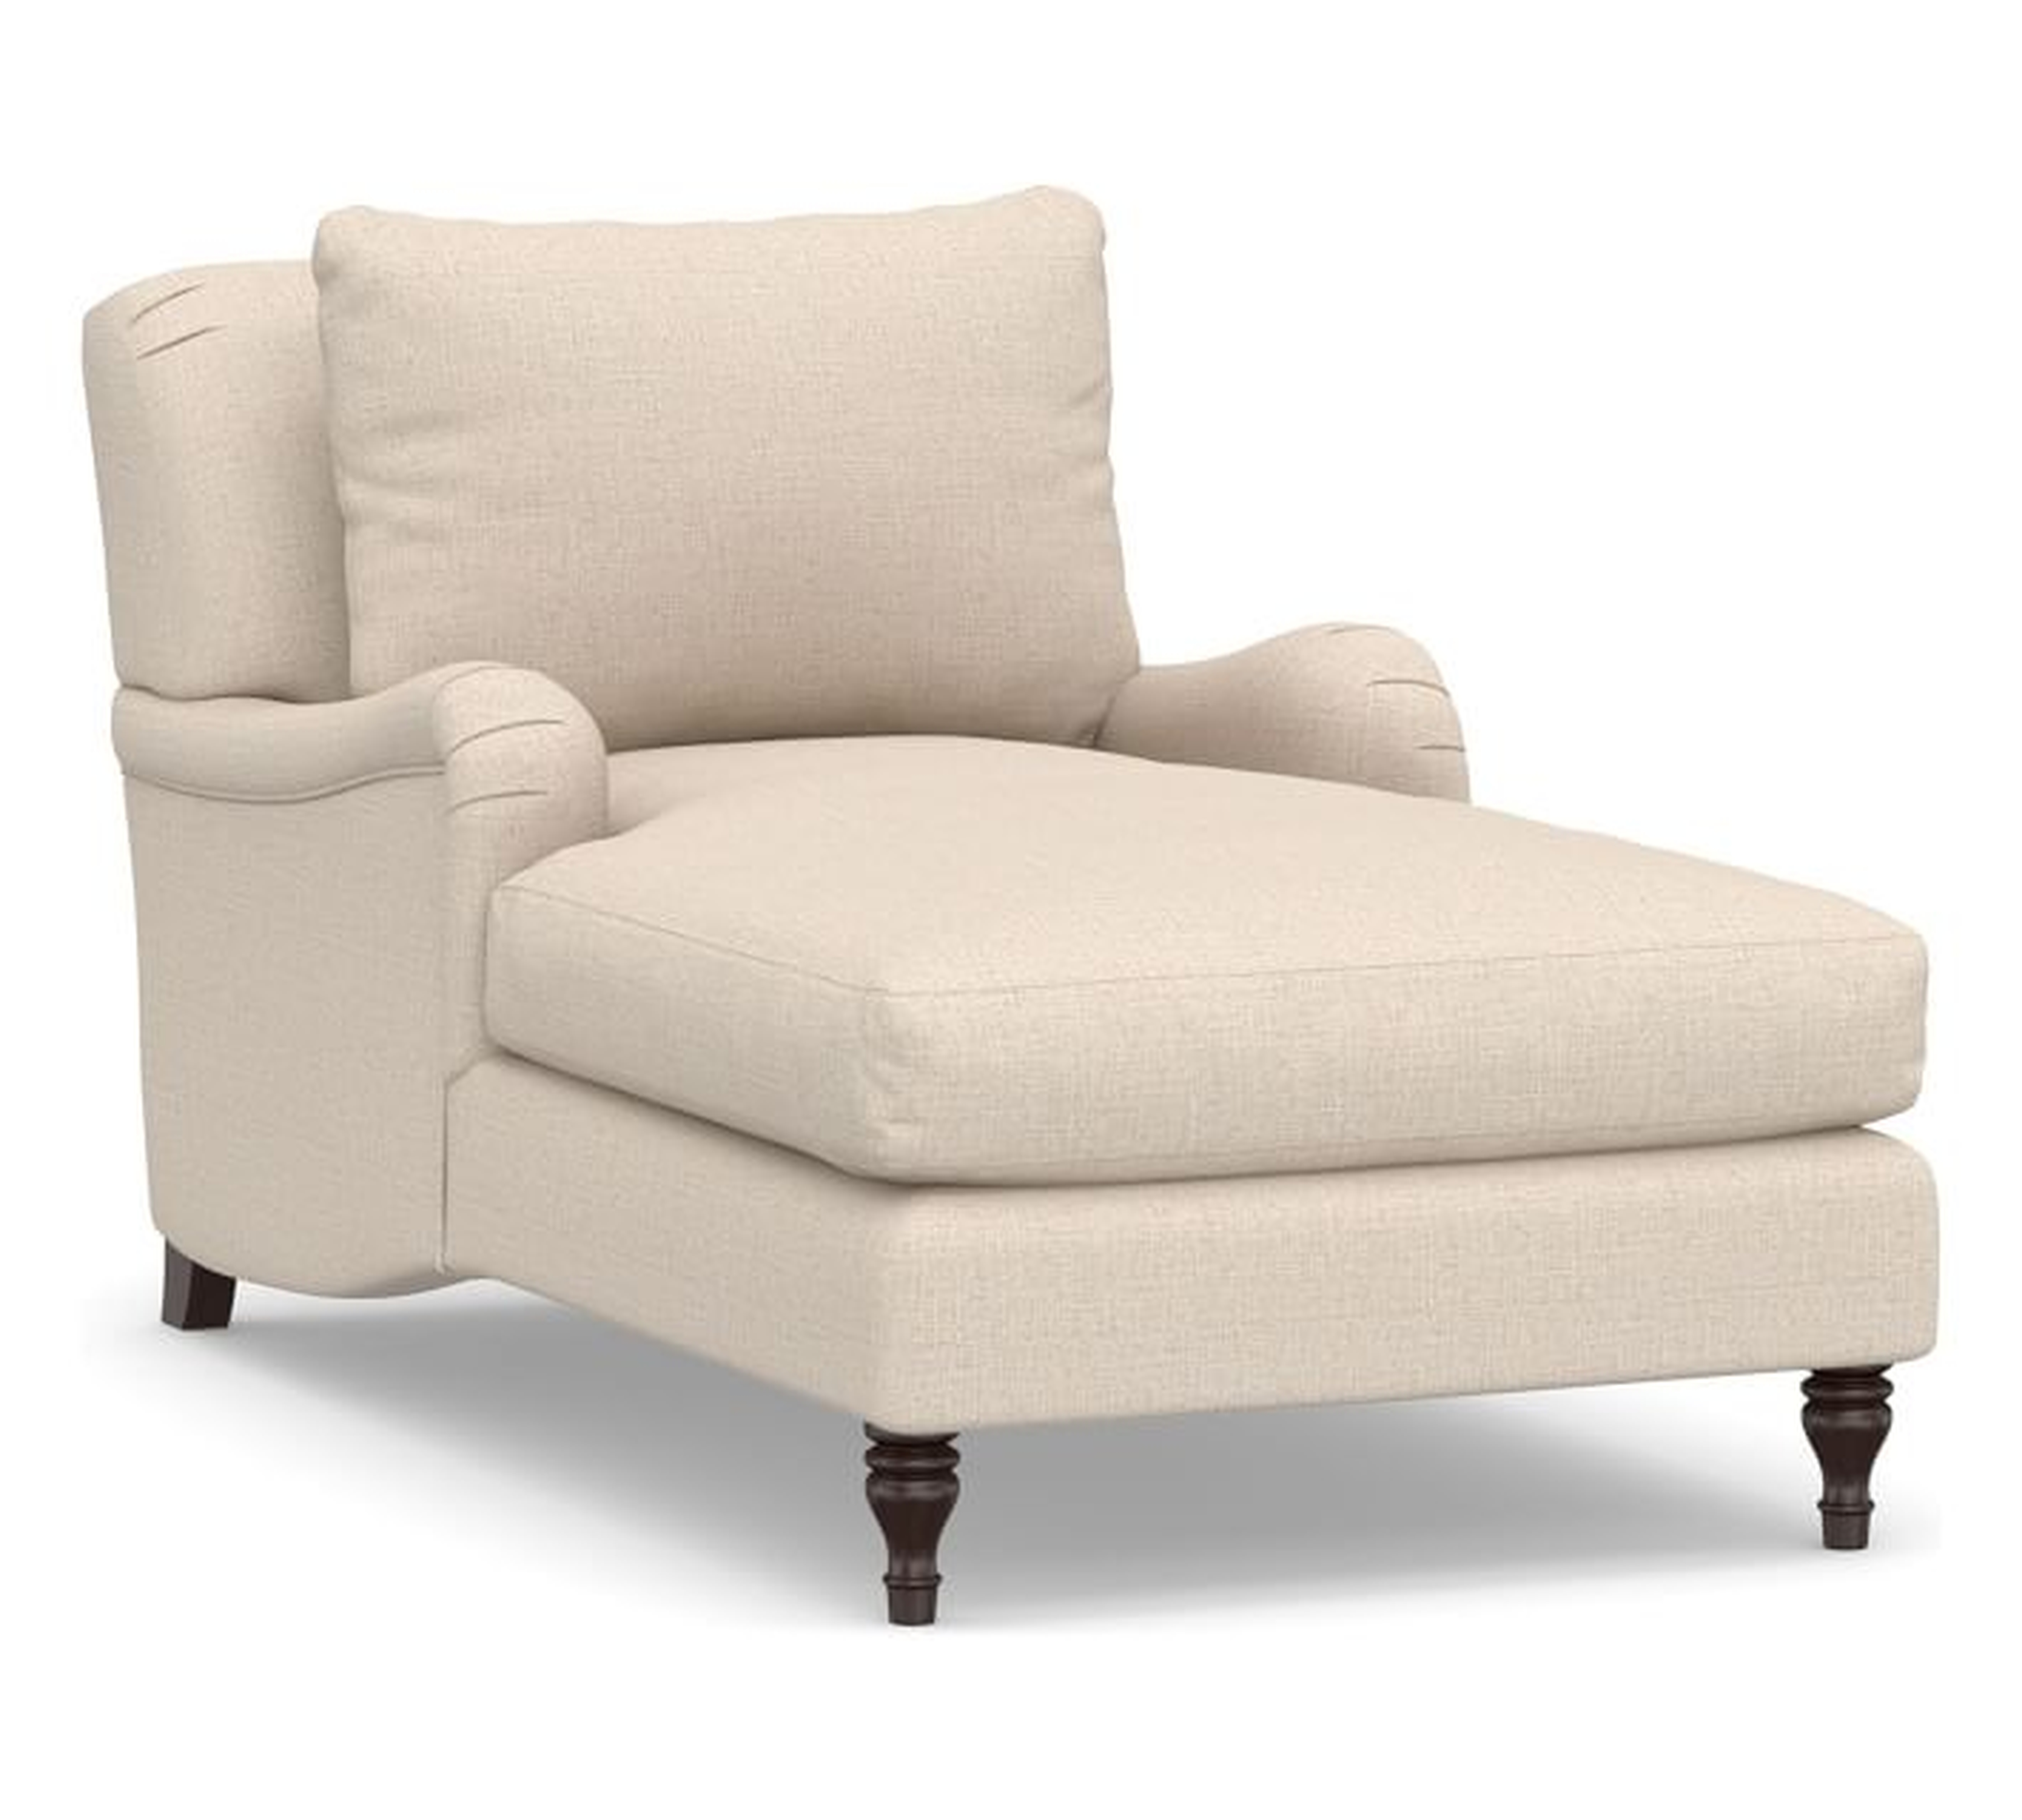 Carlisle English Arm Upholstered Chaise Lounge, Polyester Wrapped Cushions, Performance everydaylinen(TM) Oatmeal - Pottery Barn